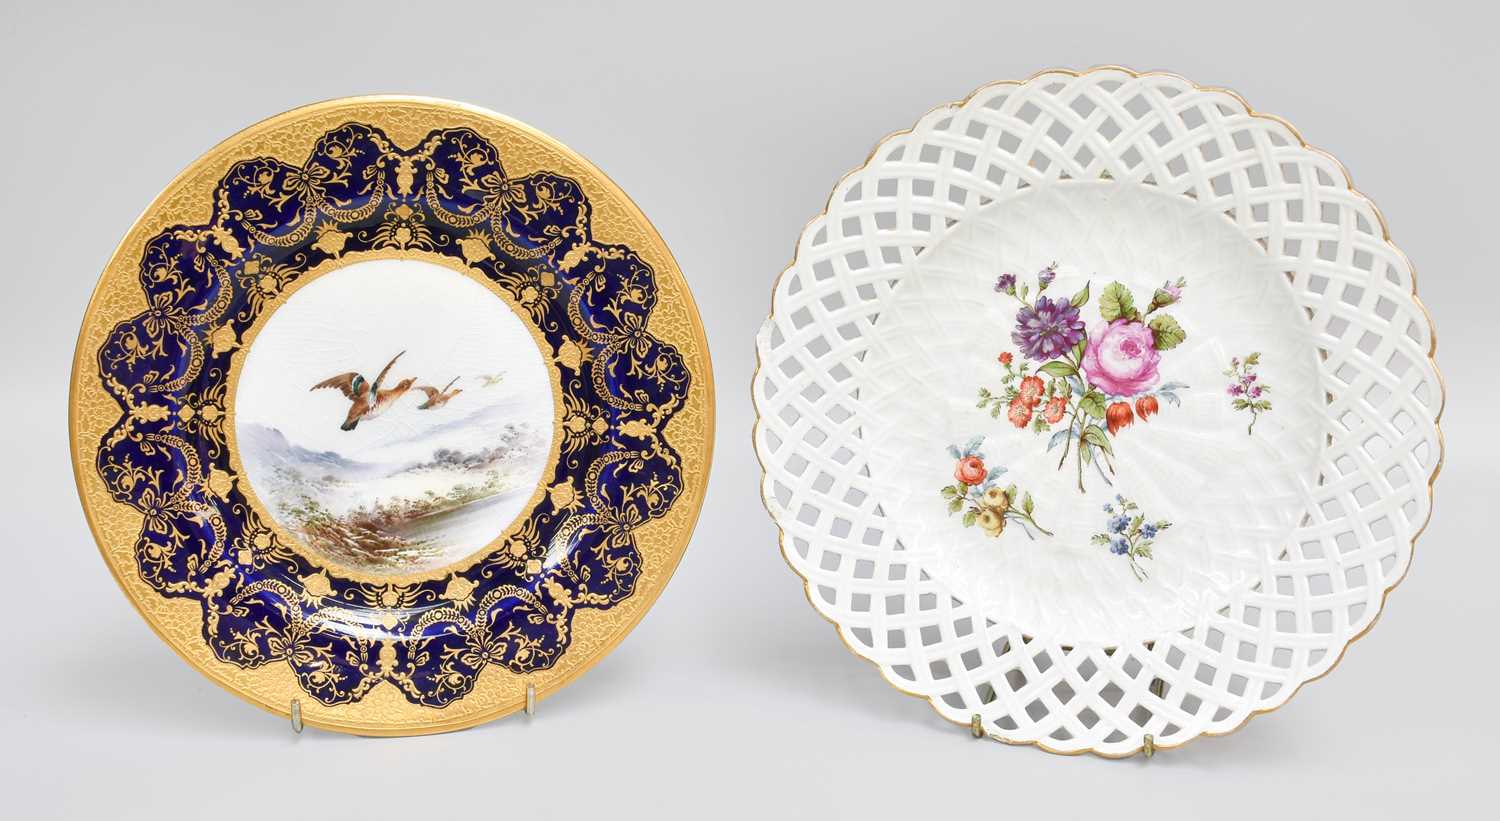 A 19th century Meissan Floral Painted Plate, on a basket weaved ground, with pierced rim; together